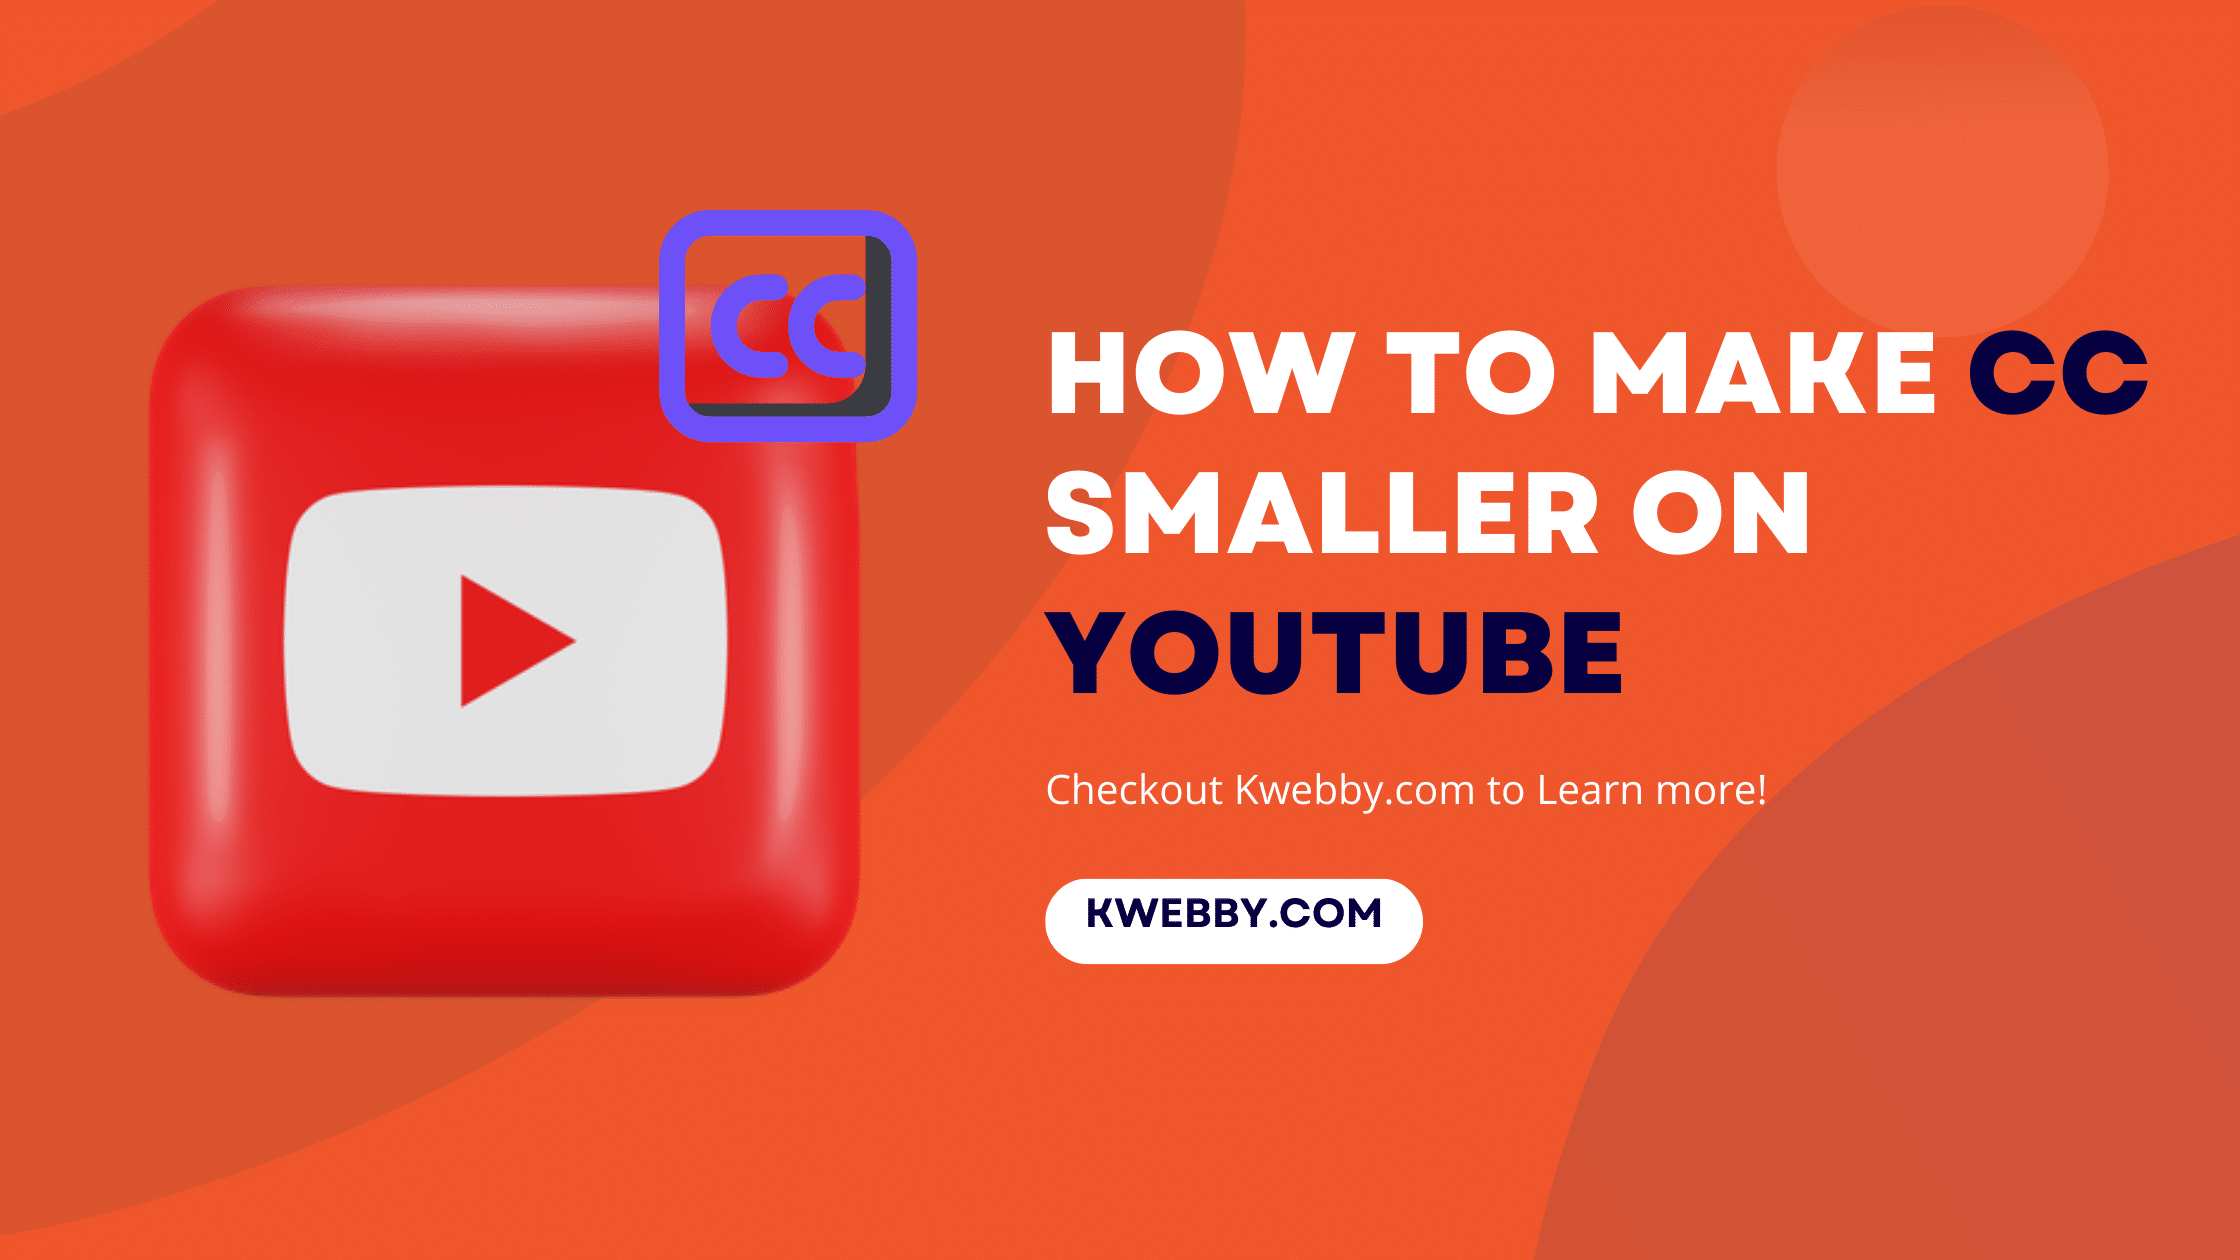 How to Make CC Smaller on YouTube in a Few Clicks